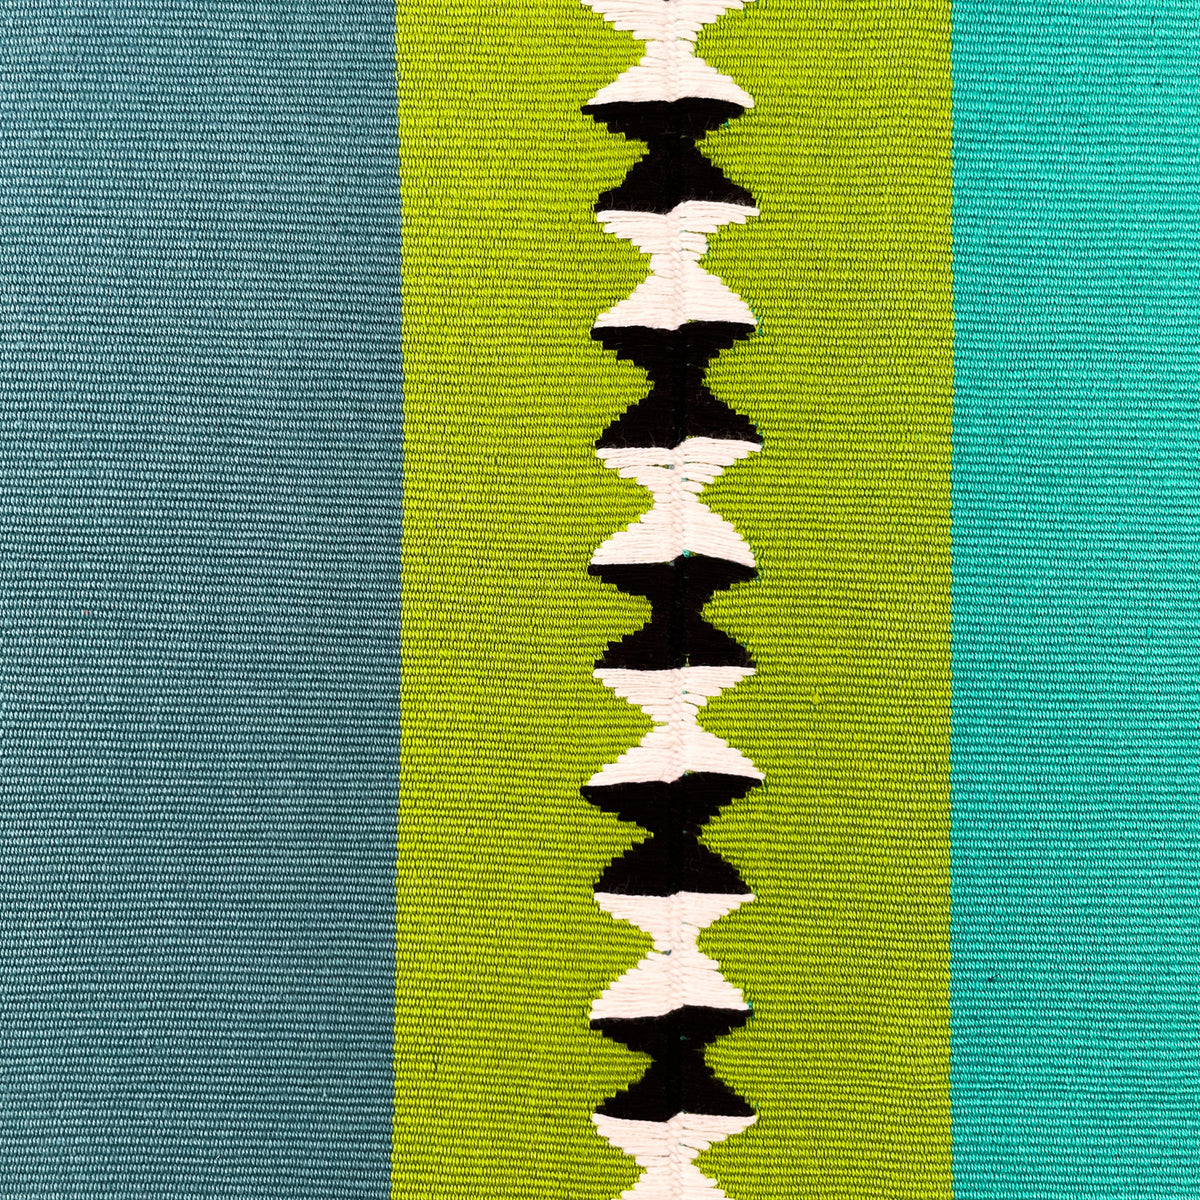 Close up swatch of cushion cover with color block panels in turquoise, green with black and white randa detail, and teal